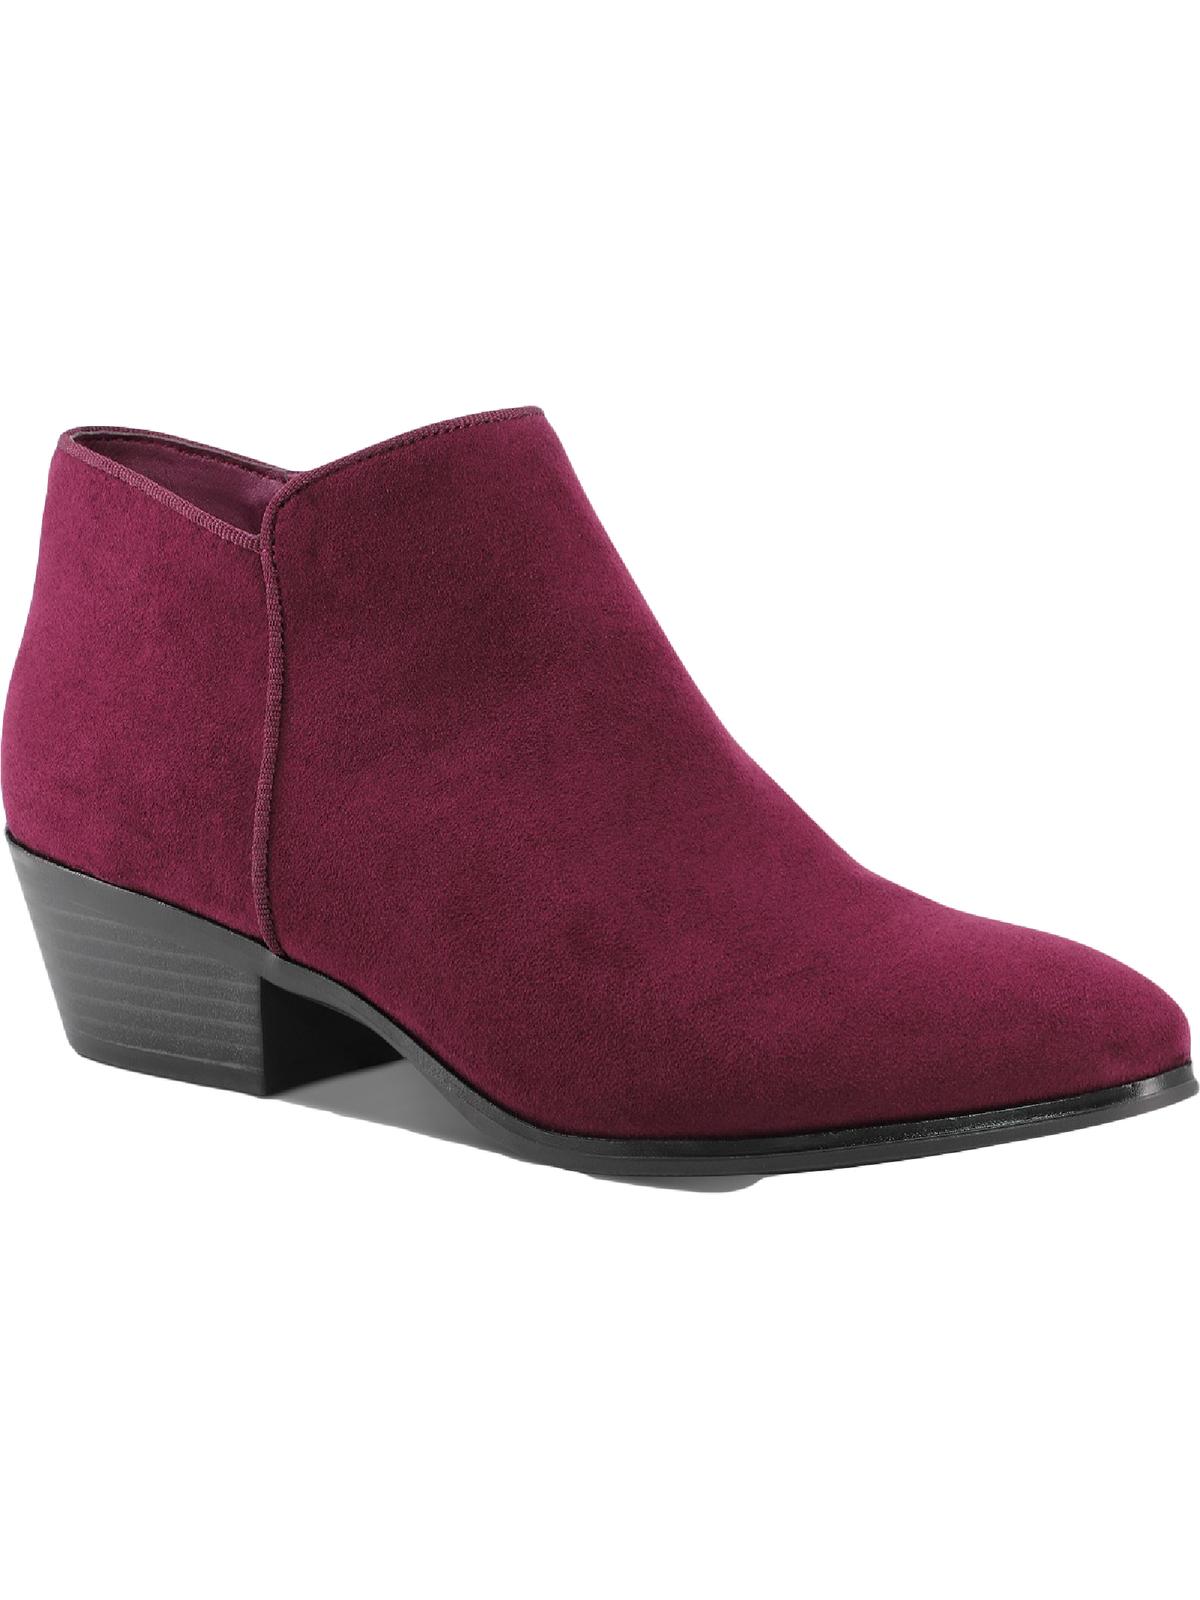 STYLE & CO Wileyy  Womens Faux Suede Comfort Booties